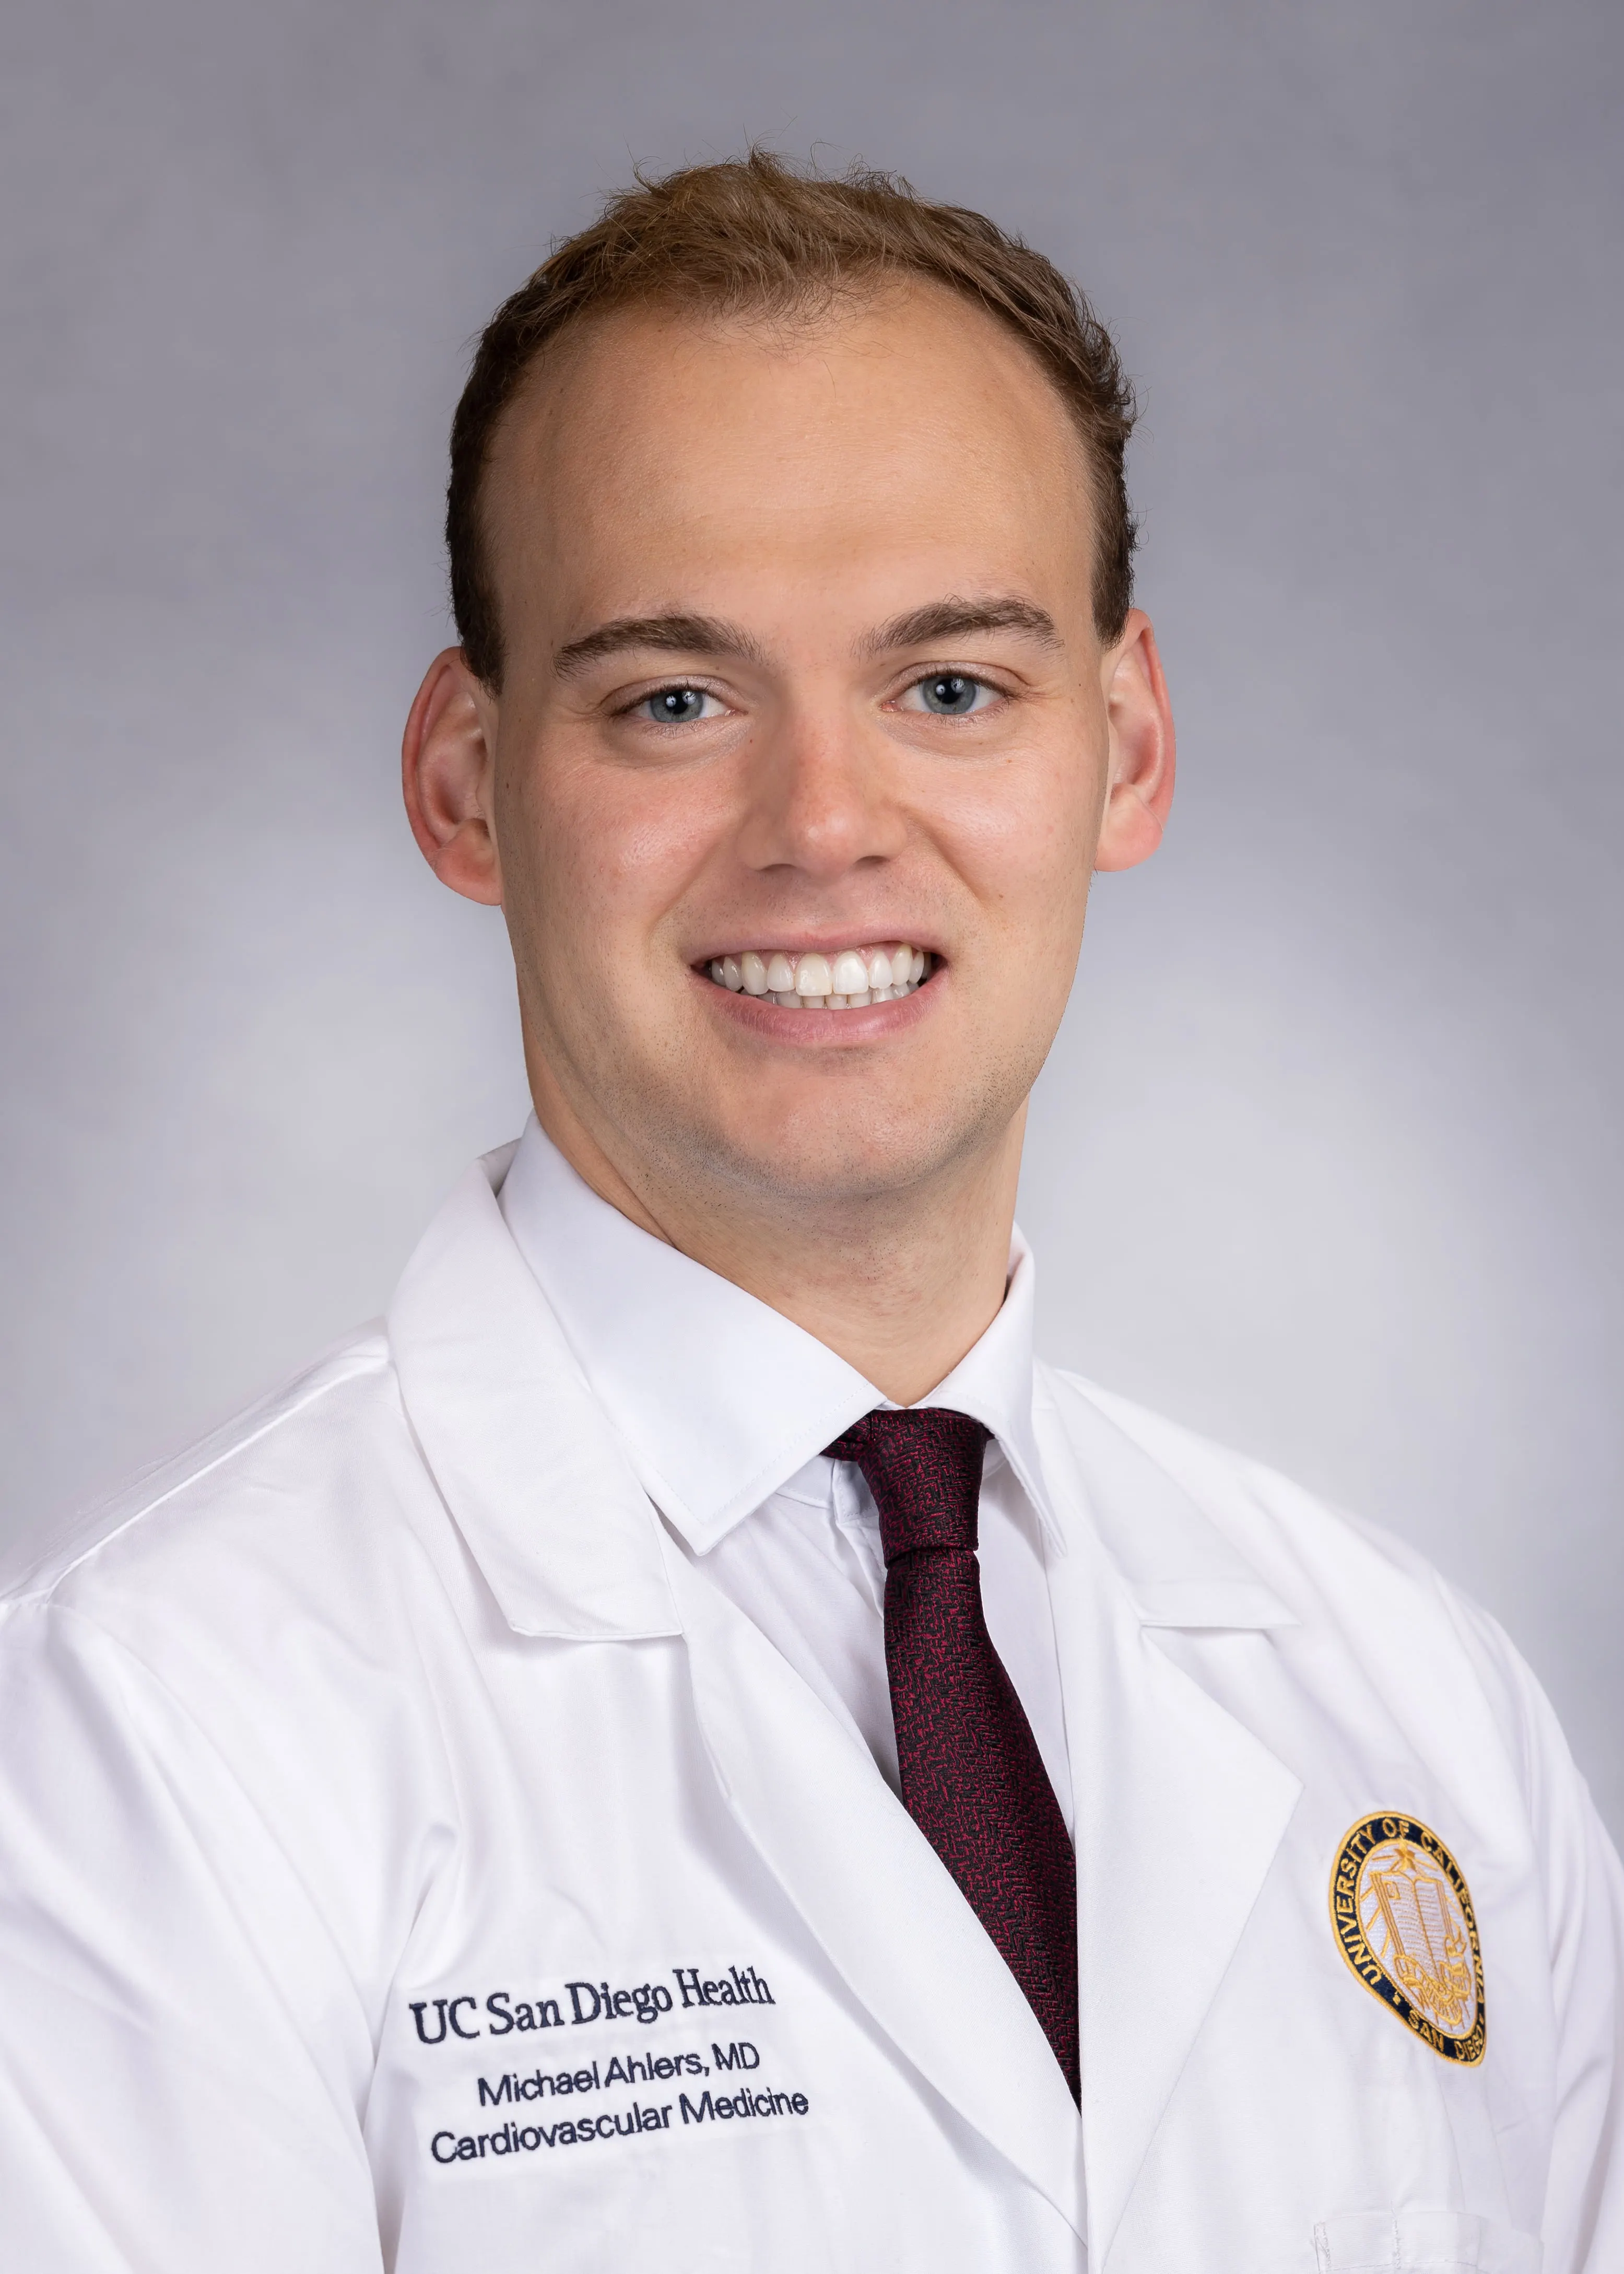 Mike Ahlers, MD